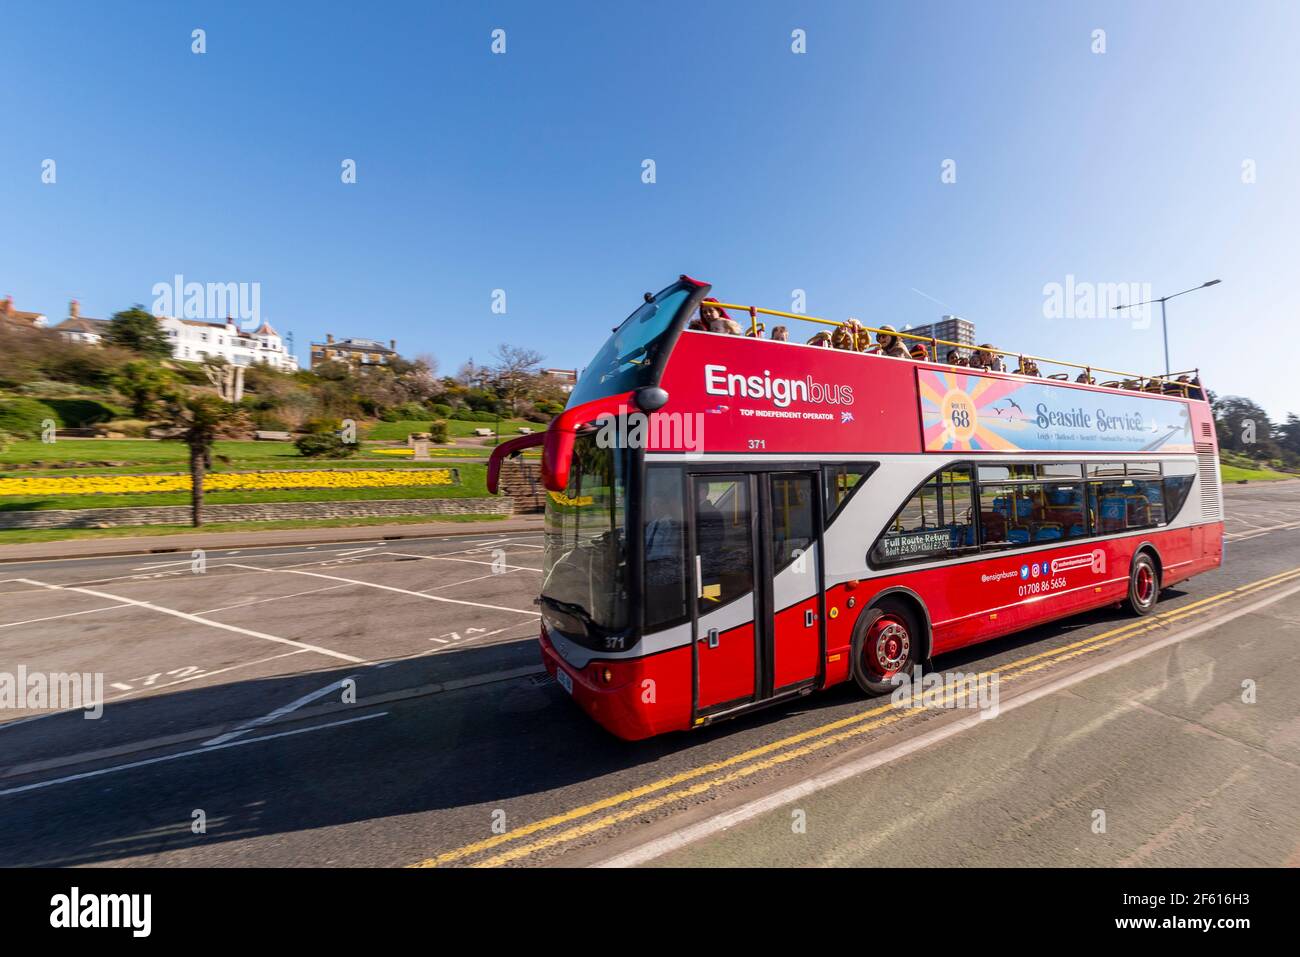 EnsignBus open top bus service in Southend on Sea, Essex, UK. Seaside Service Route 68, passing bright colourful Cliff Gardens on sunny day Stock Photo